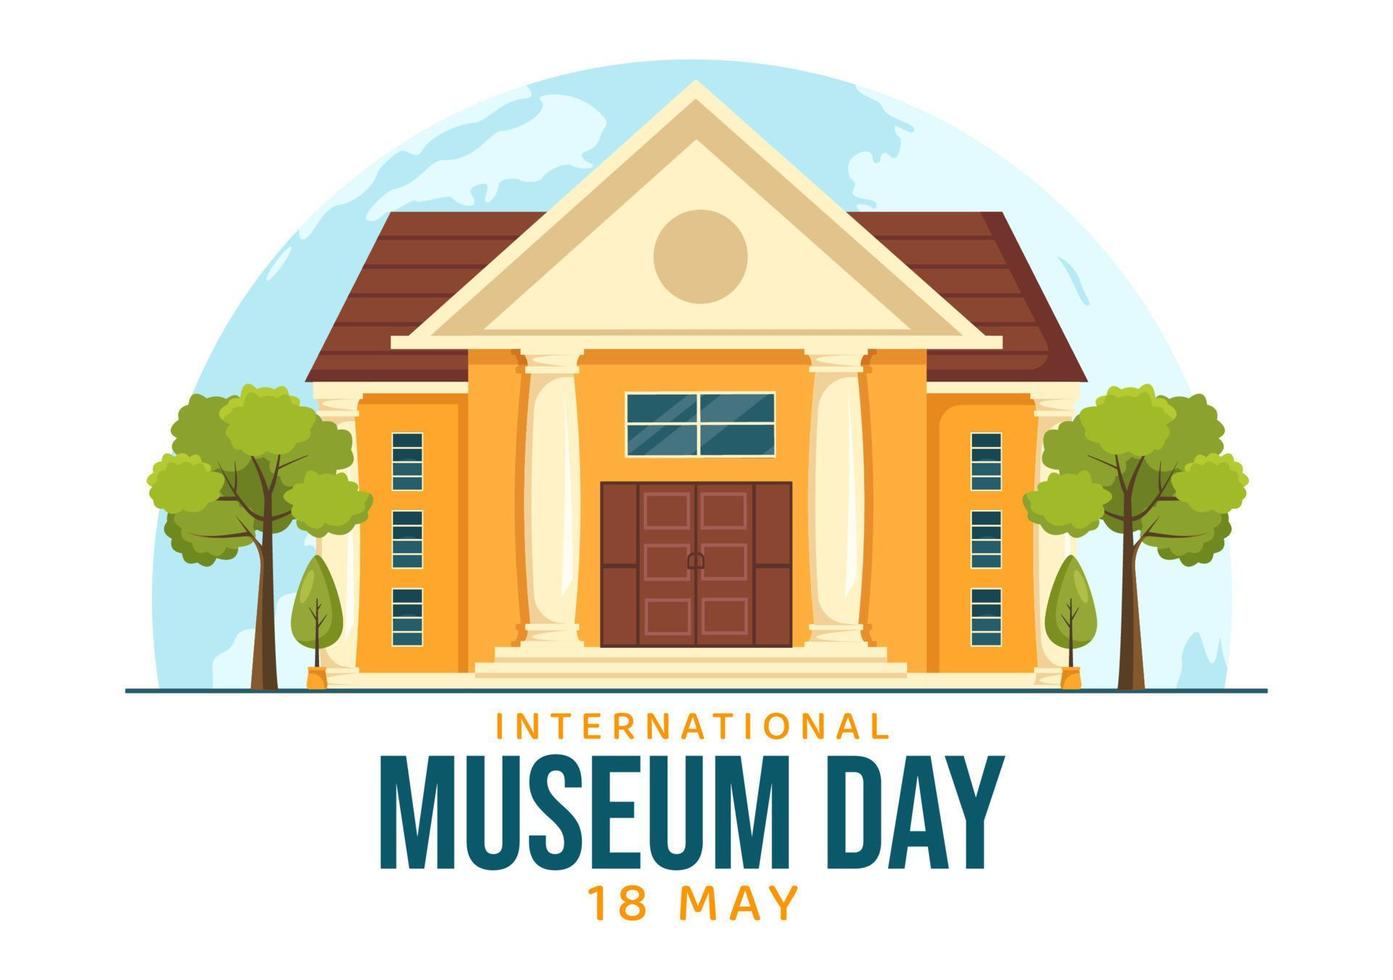 International Museum Day on May 18 Illustration with Building Gallery or Artworks in Flat Cartoon Hand Drawn for Web Banner or Landing Page Templates vector